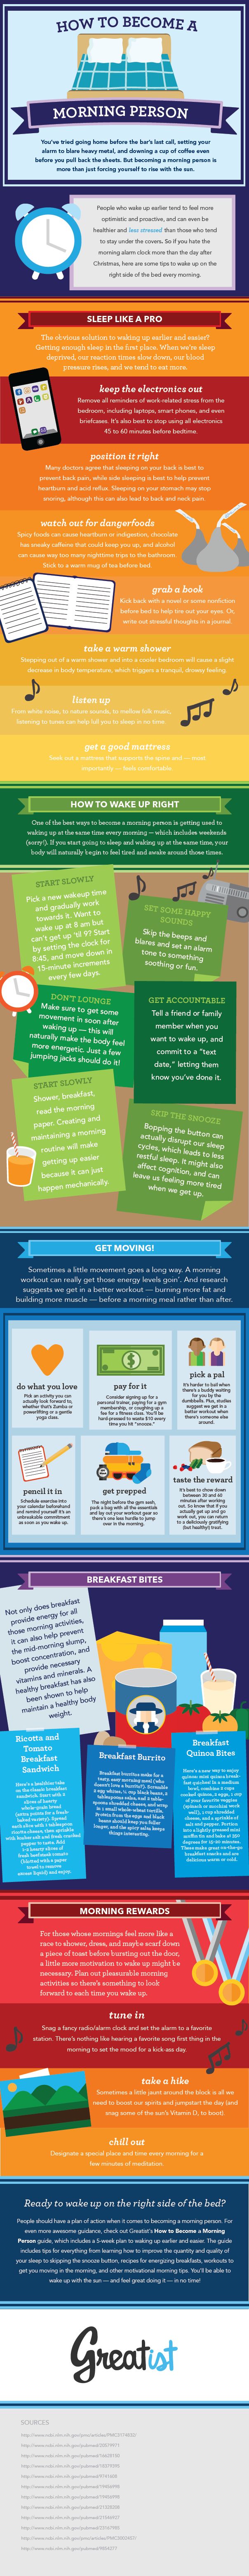 How to Become a Morning Person [Infographic]